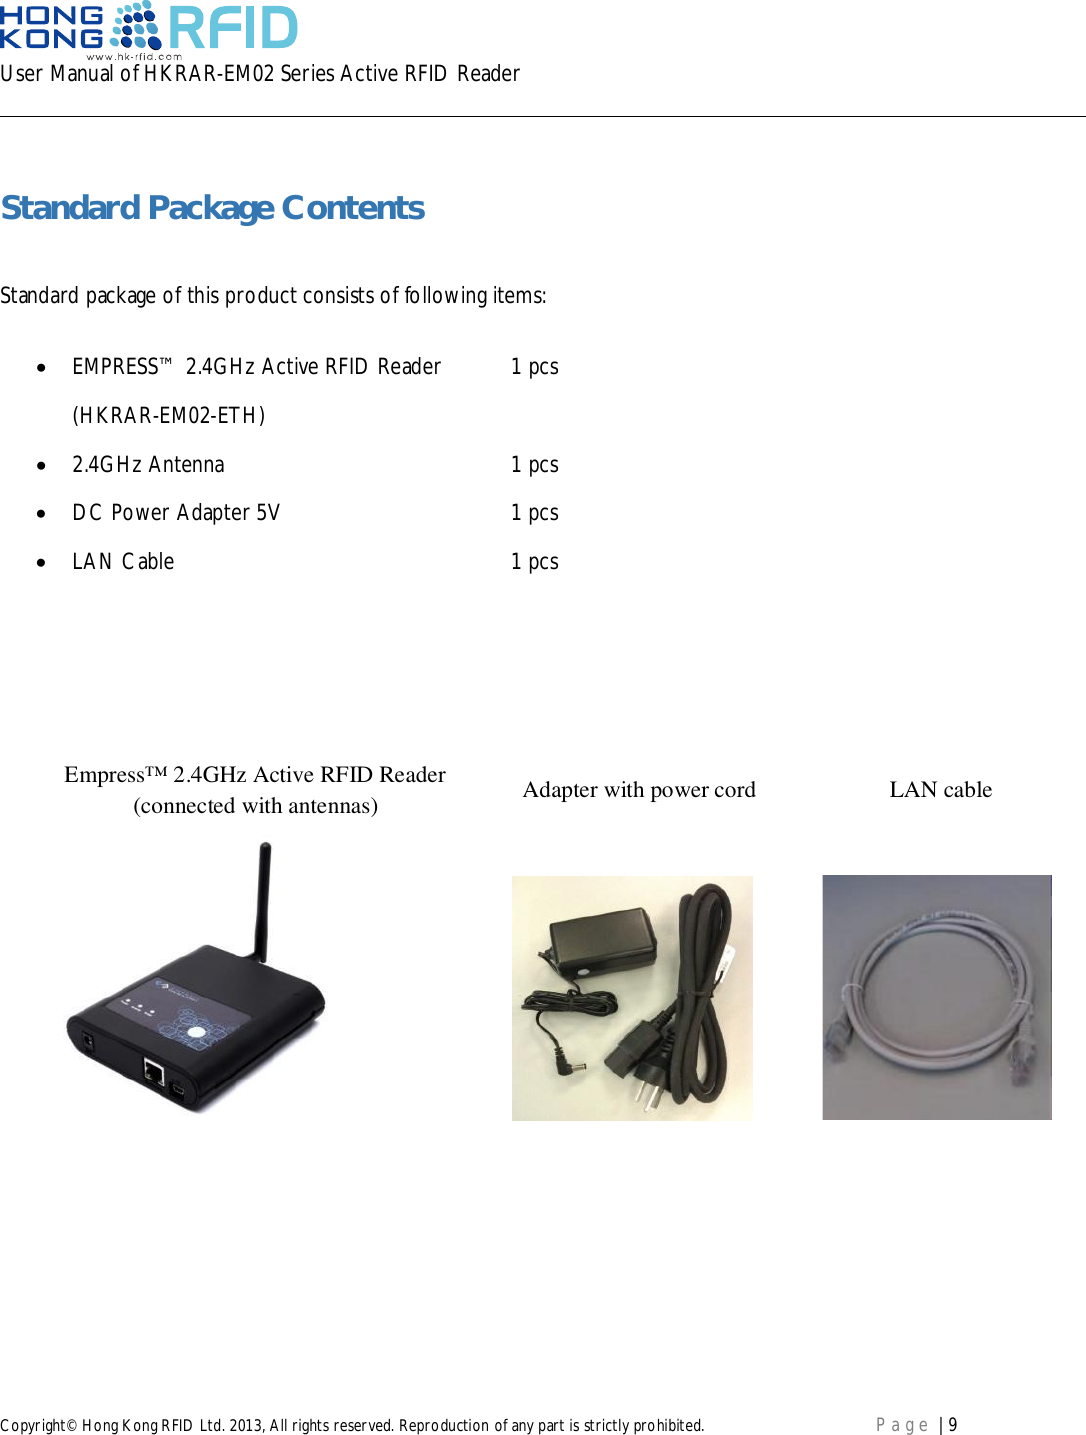 User Manual of HKRAR-EM02 Series Active RFID ReaderCopyright© Hong Kong RFID Ltd. 2013, All rights reserved. Reproduction of any part is strictly prohibited. Page | 9Standard Package ContentsStandard package of this product consists of following items:EMPRESS™ 2.4GHz Active RFID Reader 1 pcs(HKRAR-EM02-ETH)2.4GHz Antenna 1 pcsDC Power Adapter 5V 1 pcsLAN Cable 1 pcsEmpress™ 2.4GHz Active RFID Reader(connected with antennas) Adapter with power cord LAN cable